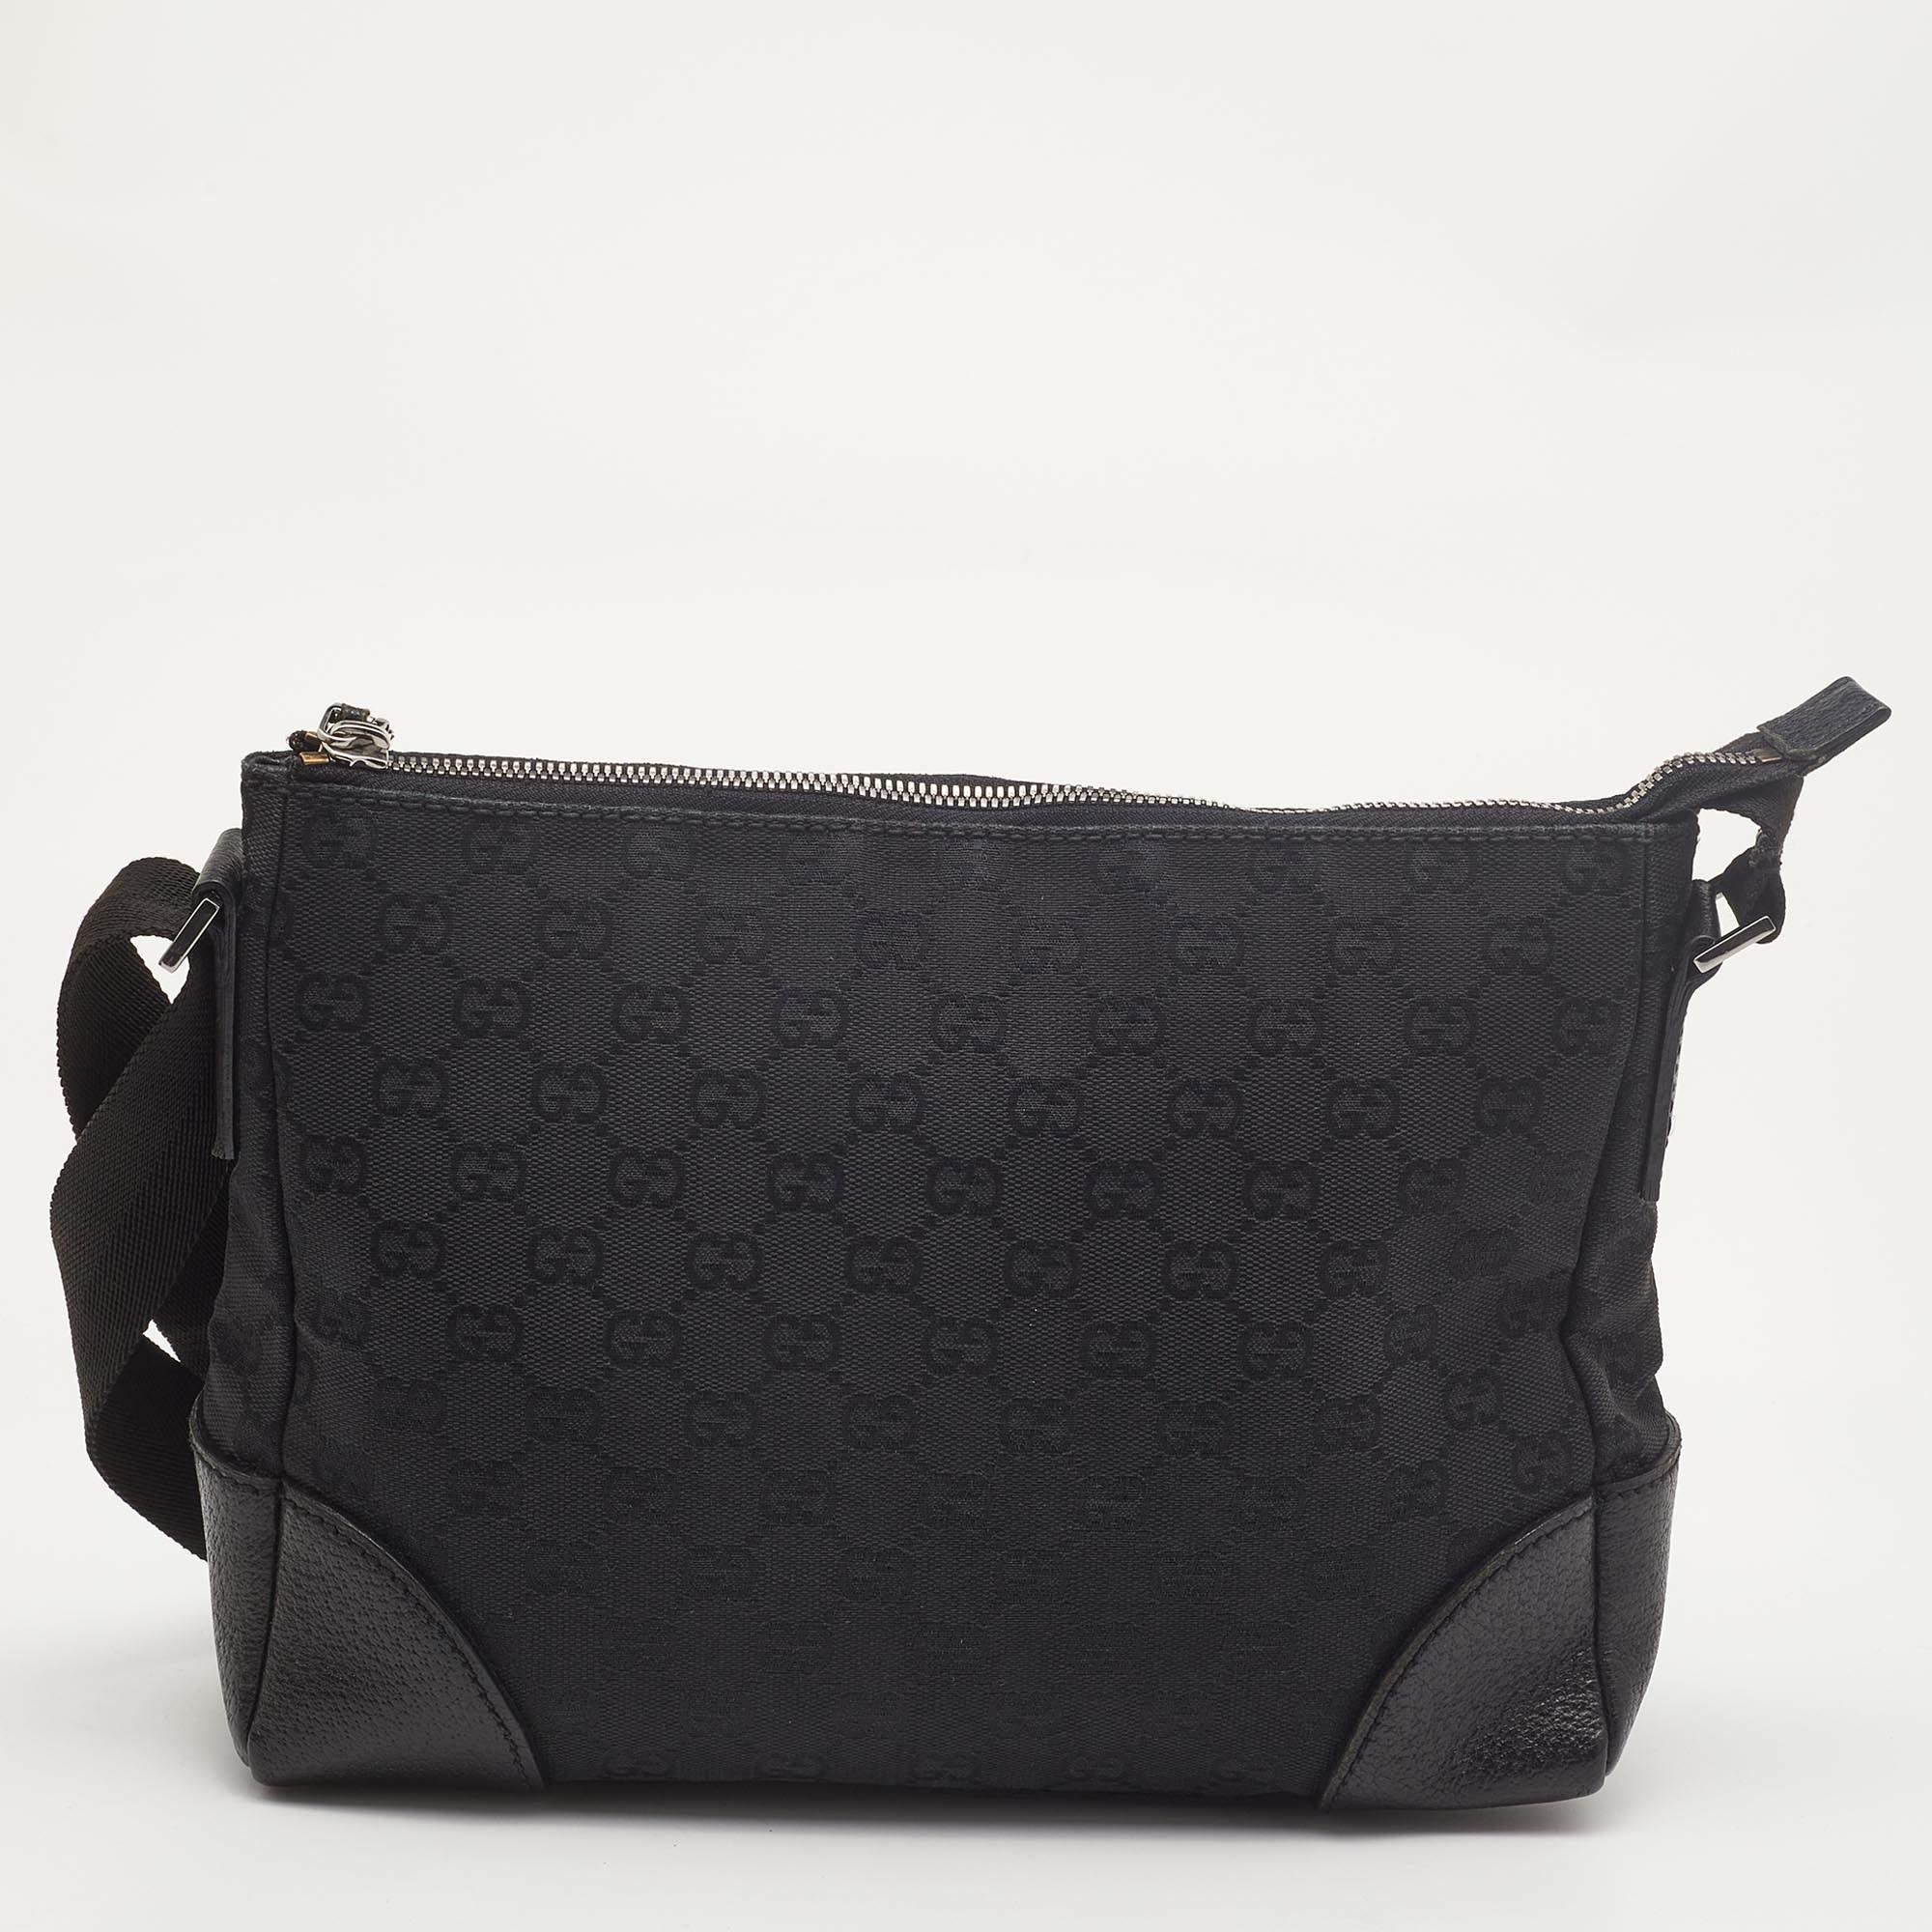 Thoughtful details, high quality, and everyday convenience mark this designer bag for women by Gucci. The bag is sewn with skill to deliver a refined look and an impeccable finish.

Includes: Original Dustbag

